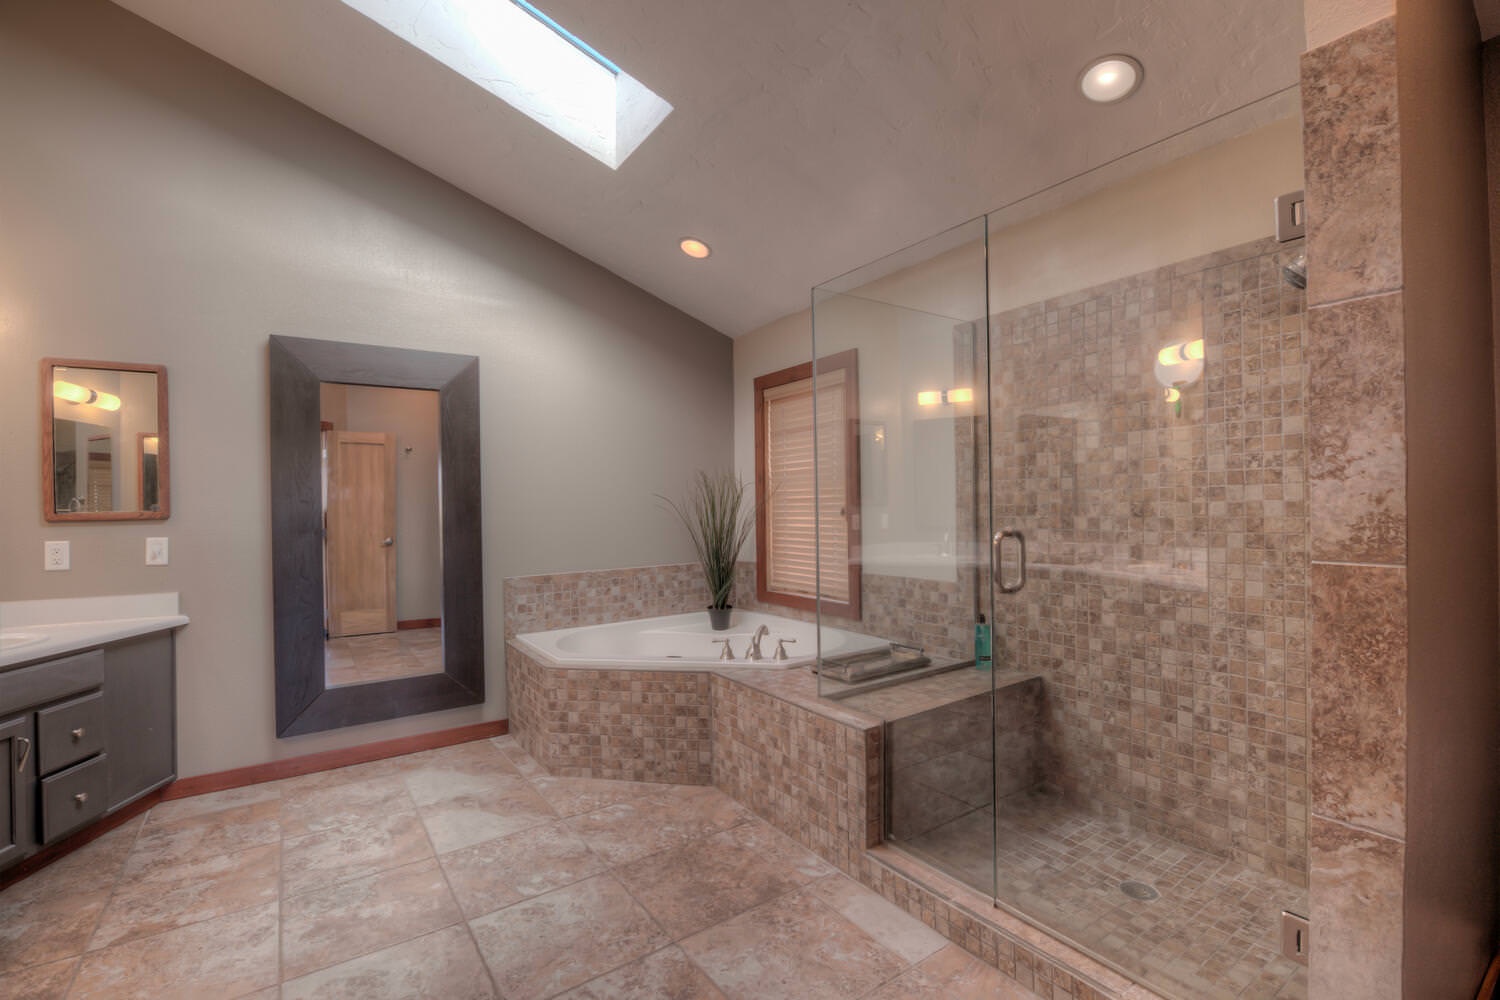 Master bedroom bathroom with separate jacuzzi tub, and stand up shower